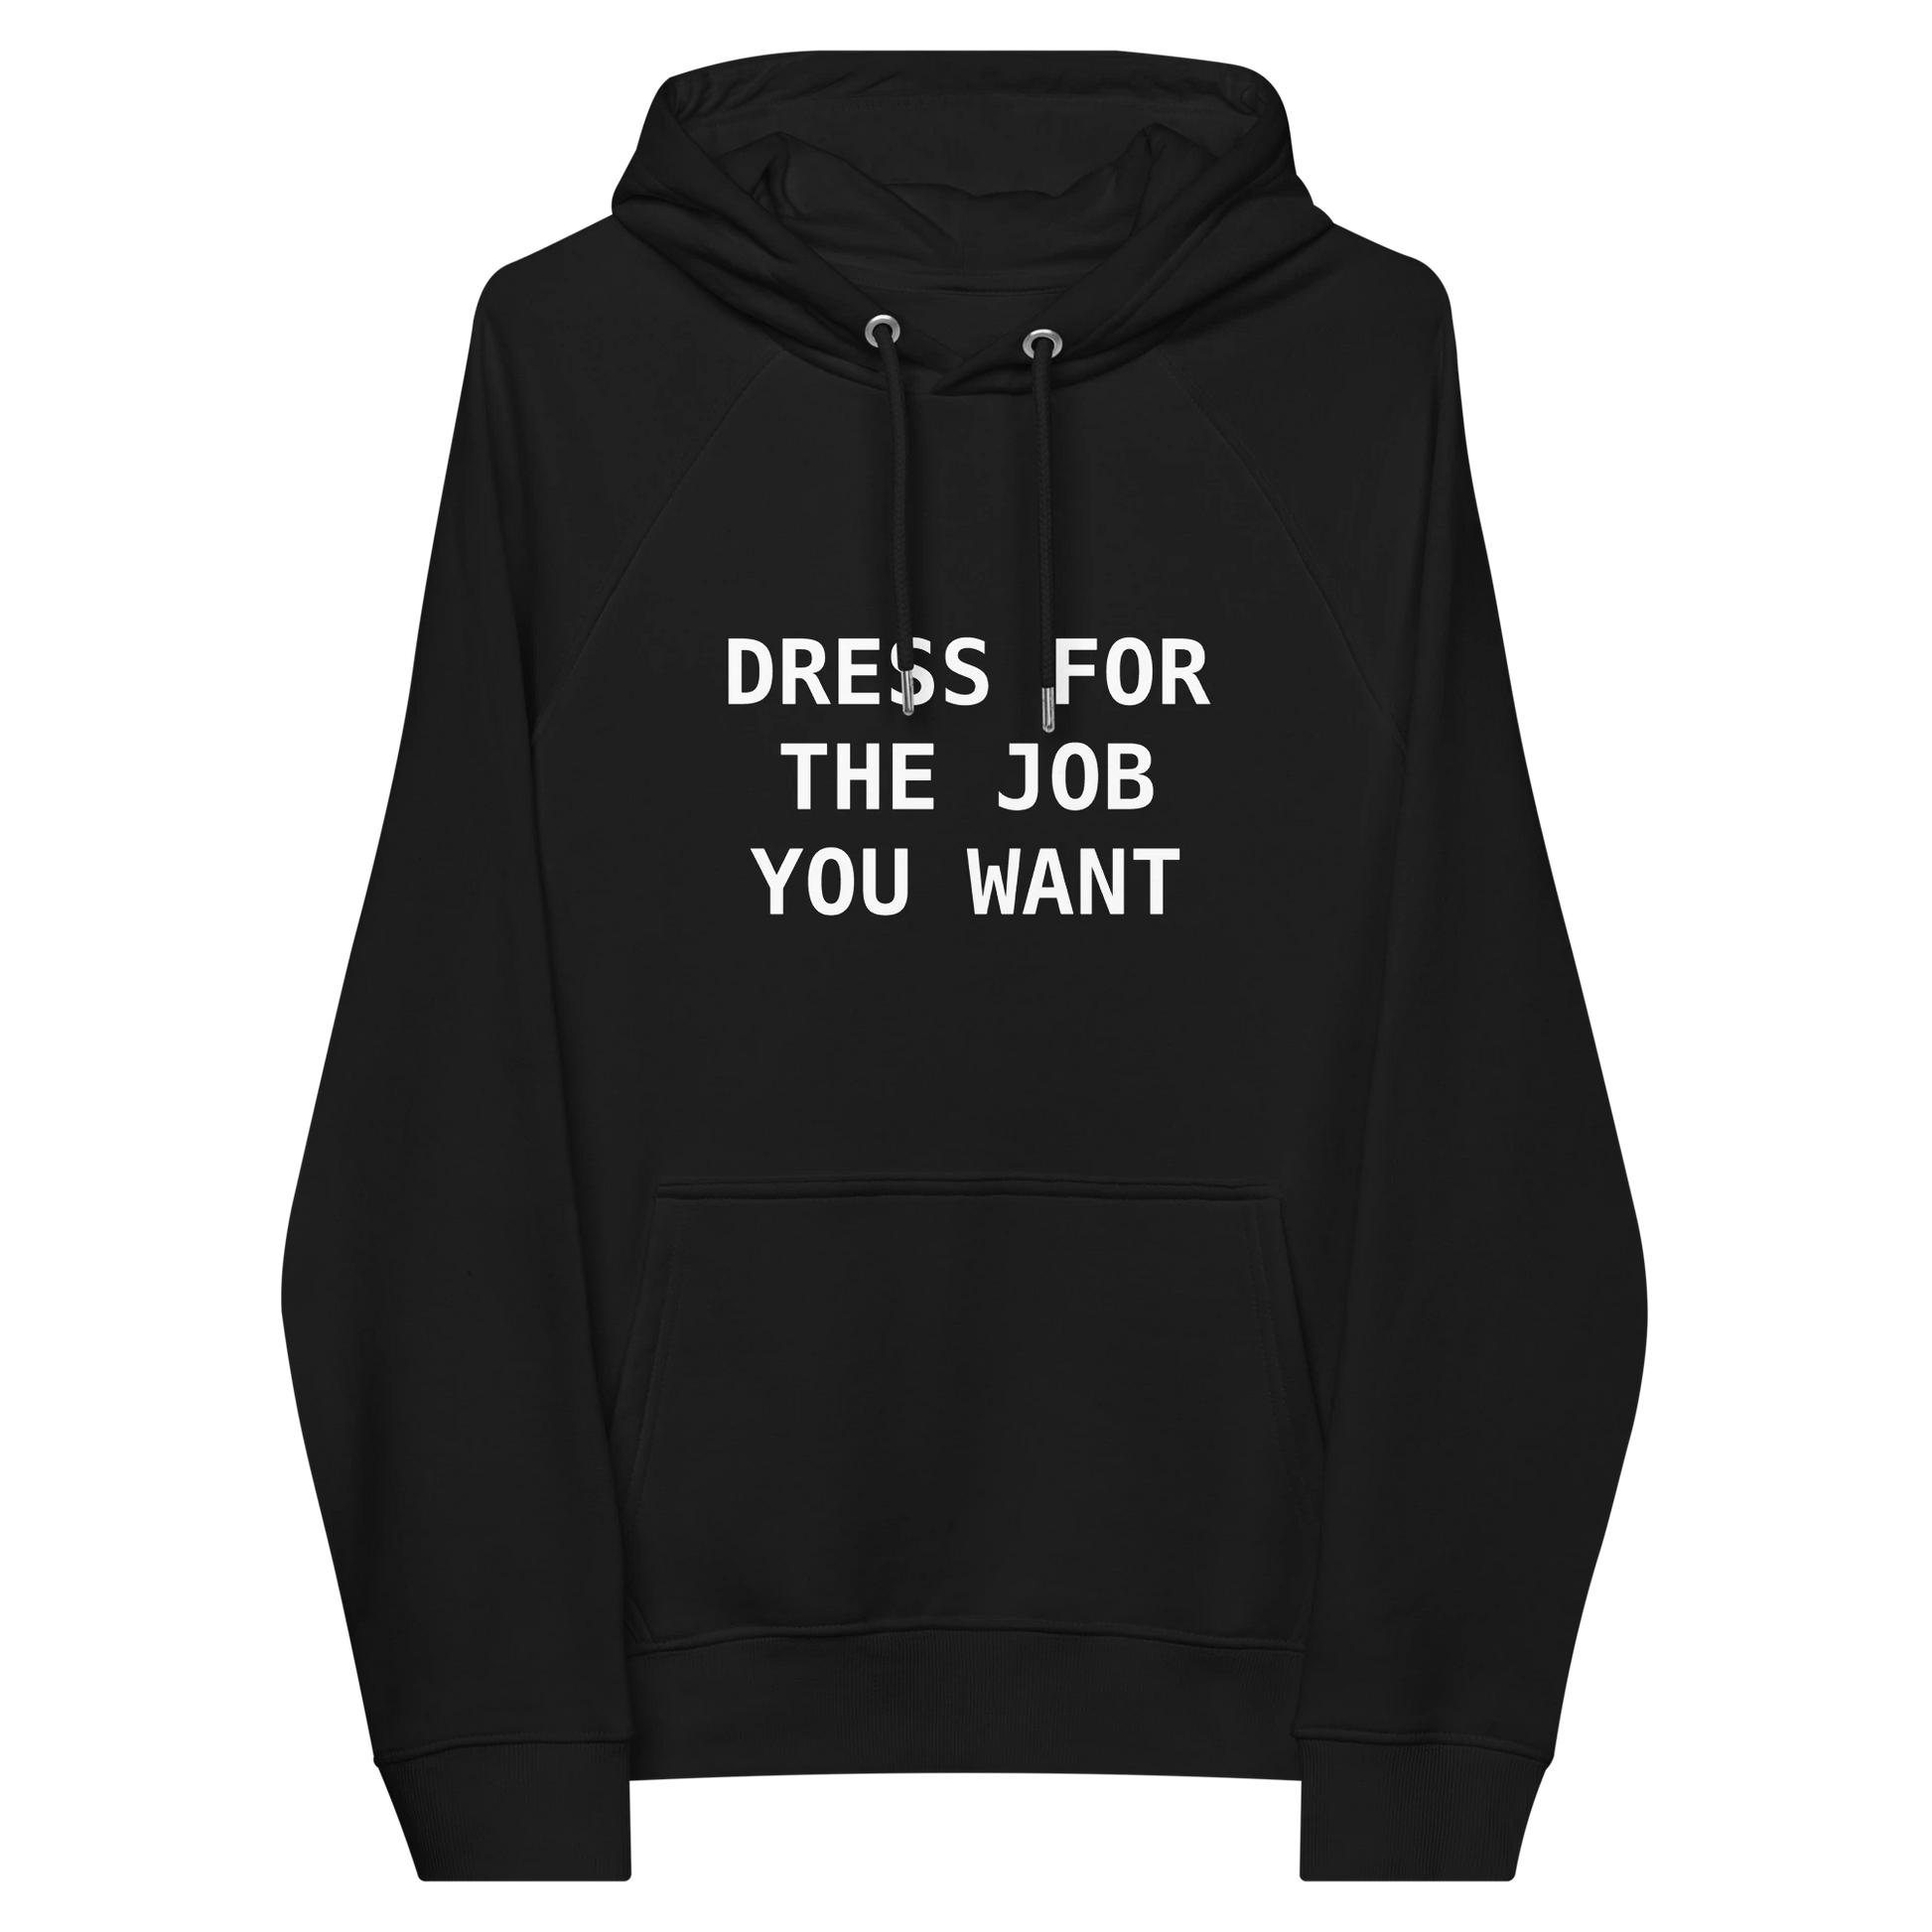 Dress for the job you want premium hoodie front flat 2 front